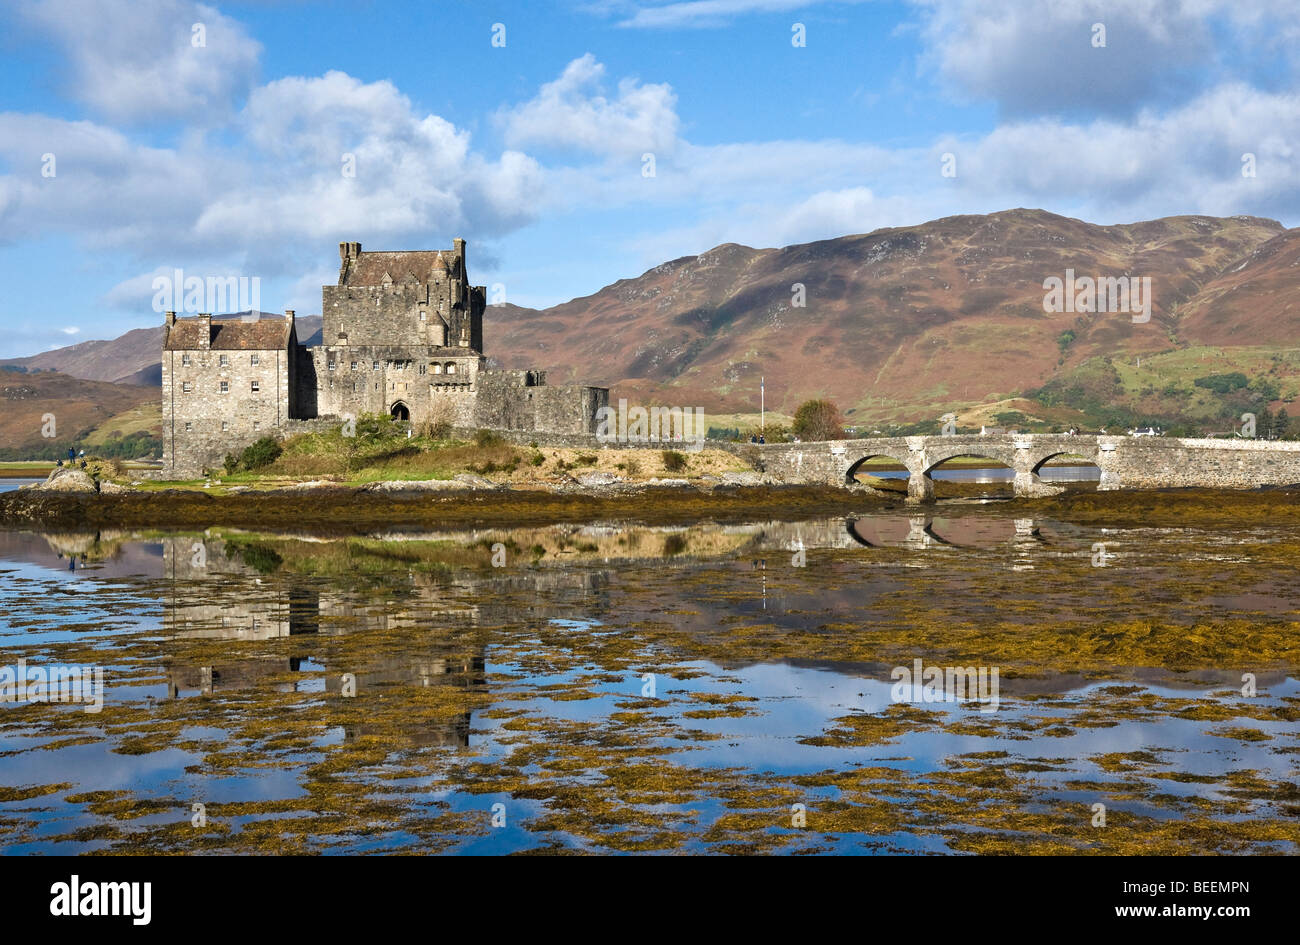 Eilean Donan Castle located at Dornie by Loch Duich in the Western Highlands of Scotland Stock Photo